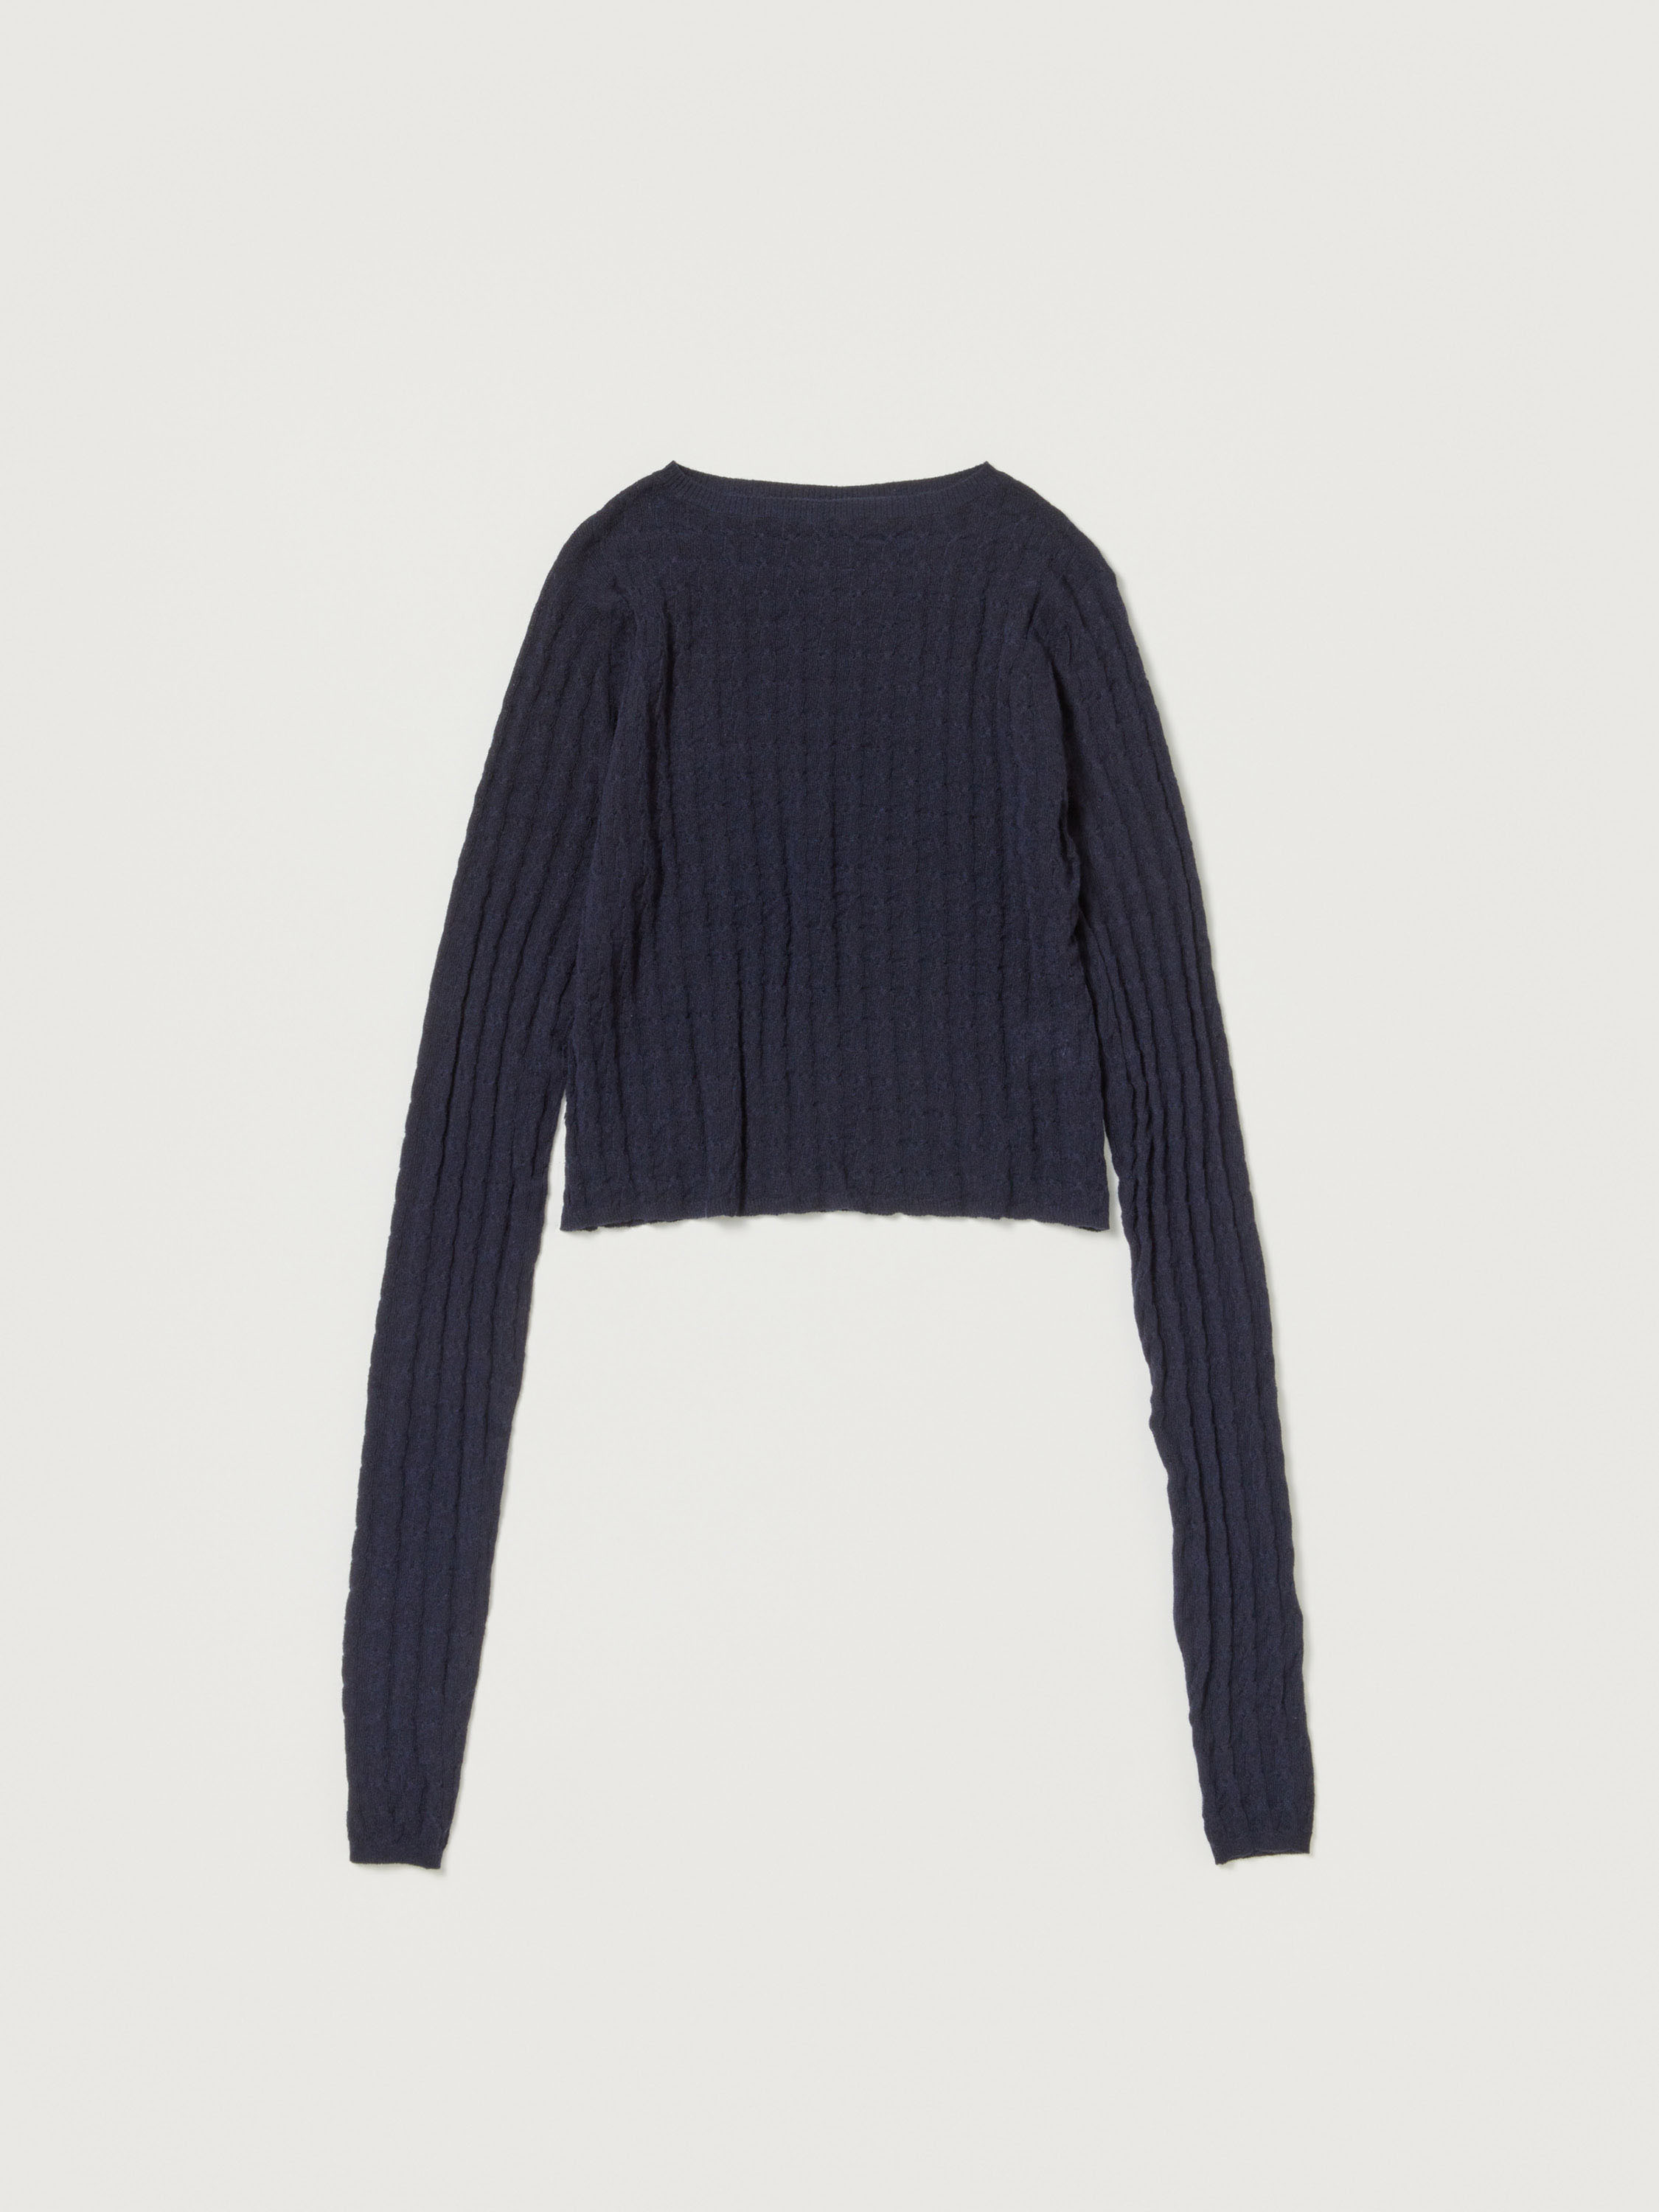 WASHABLE CASHMERE SILK CABLE KNIT P/O 詳細画像 DARK NAVY 1